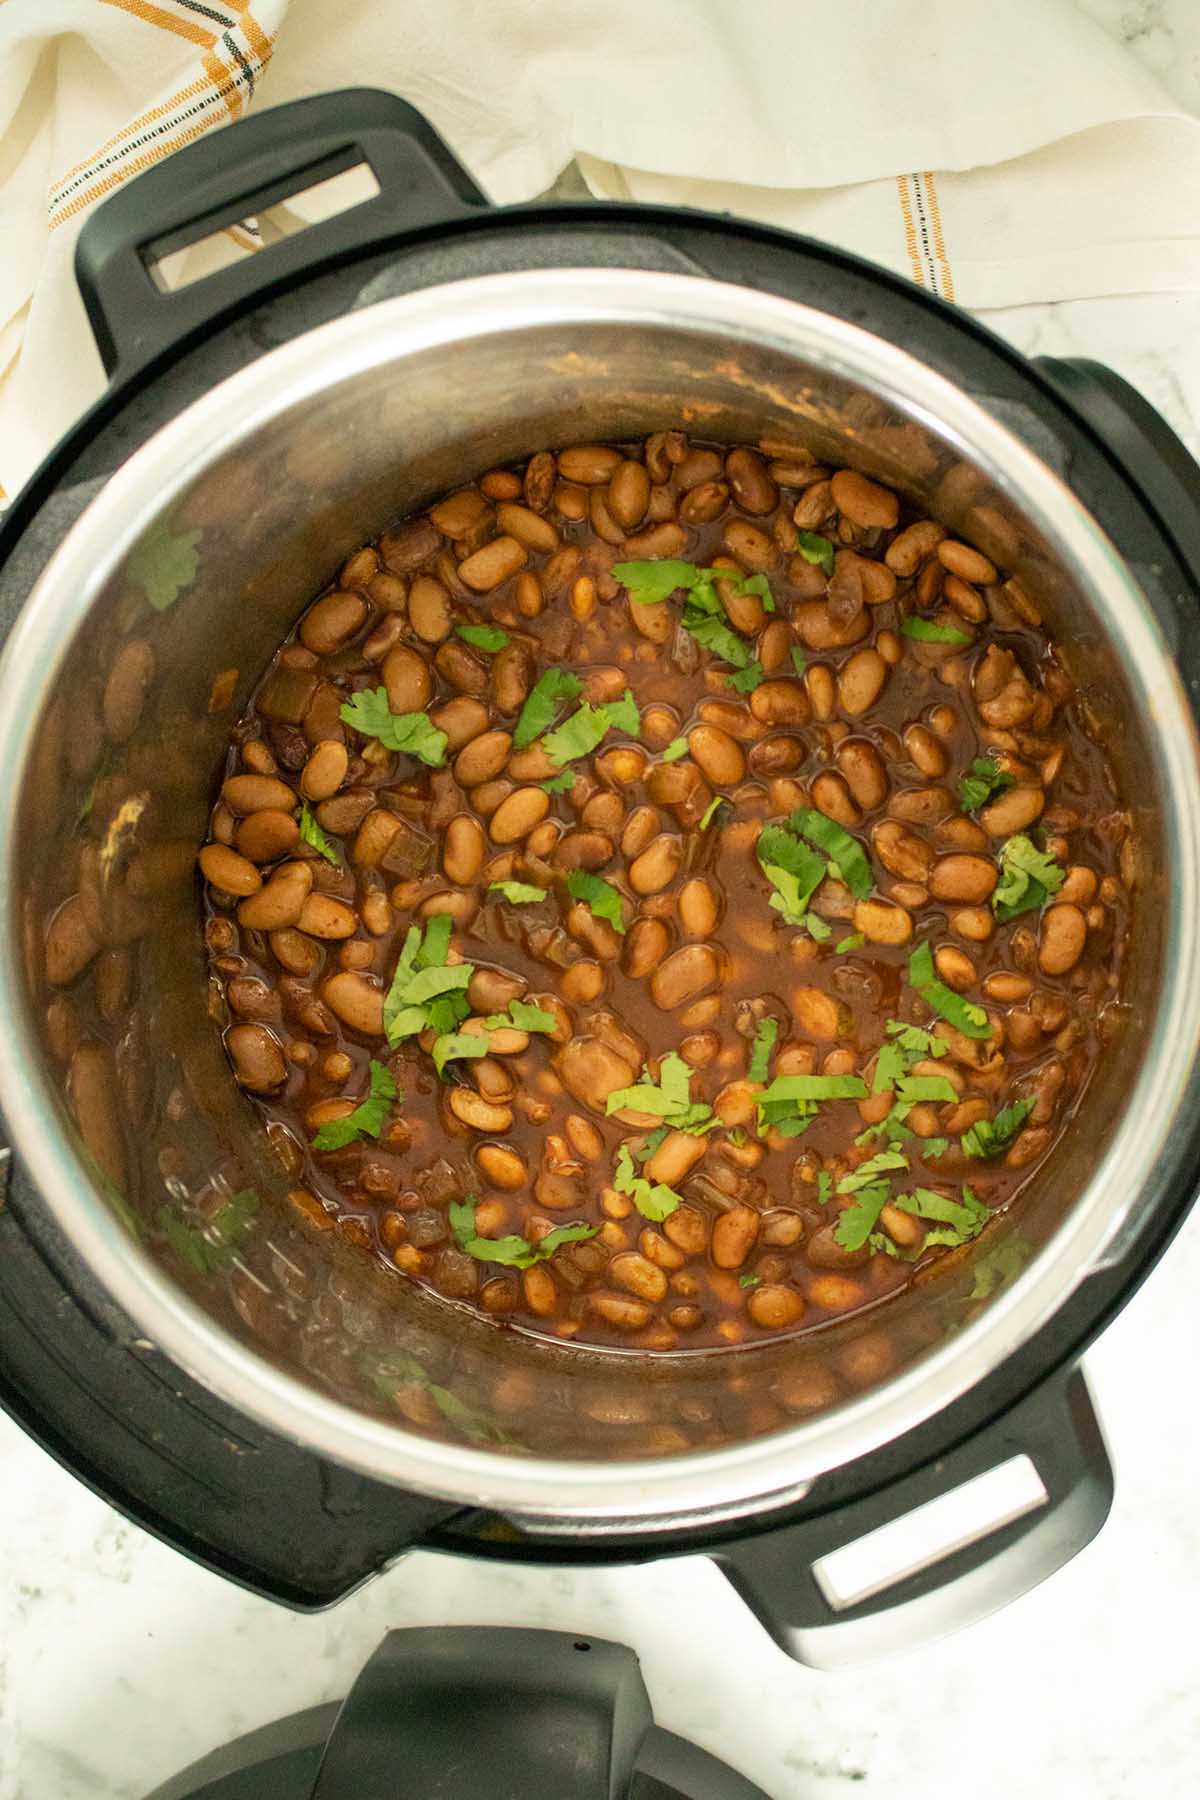 pinto beans in the Instant Pot after cooking